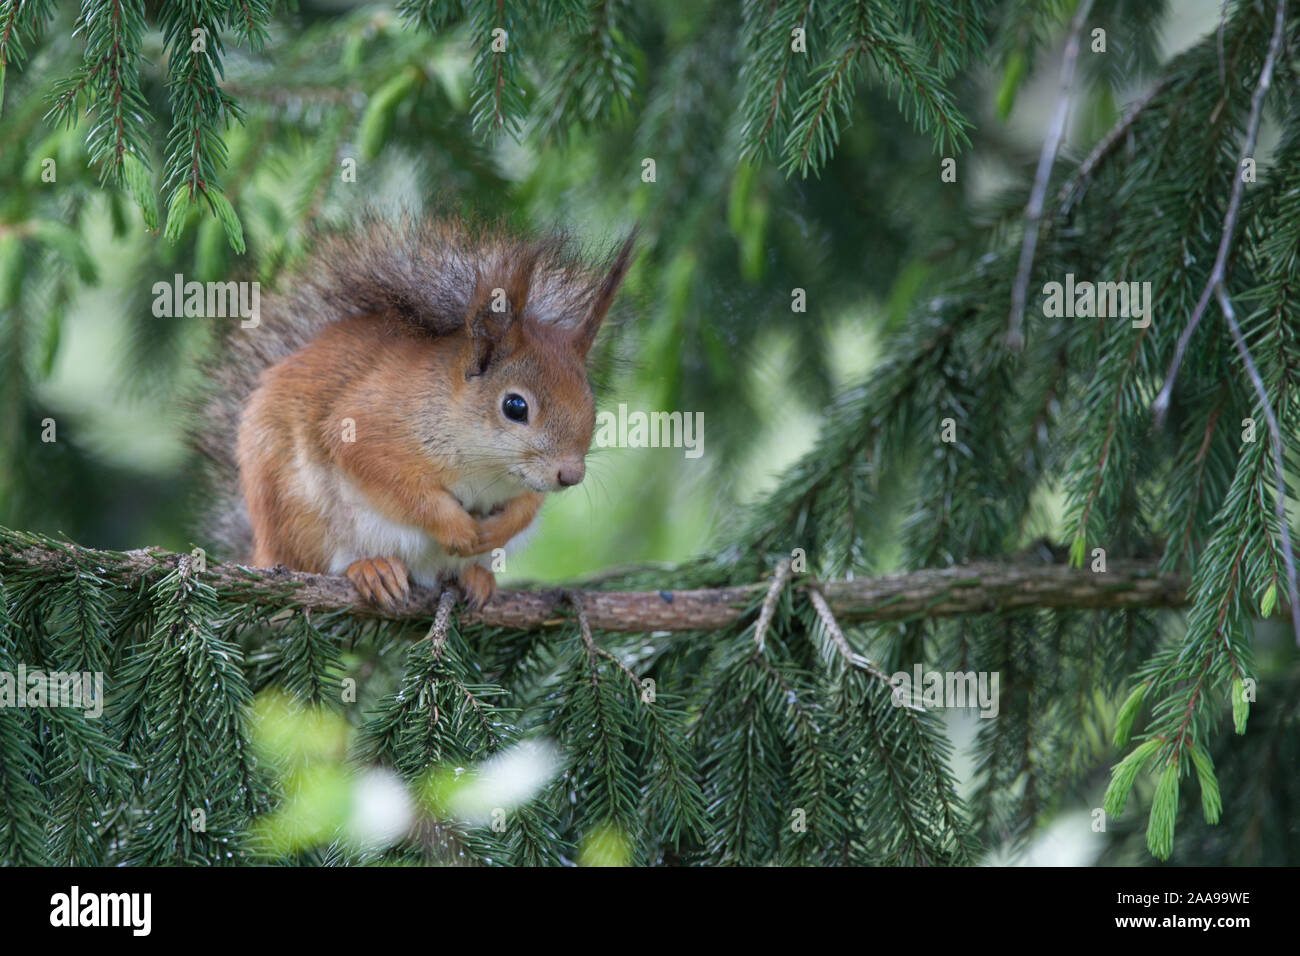 Red squirrel in pine tree Stock Photo